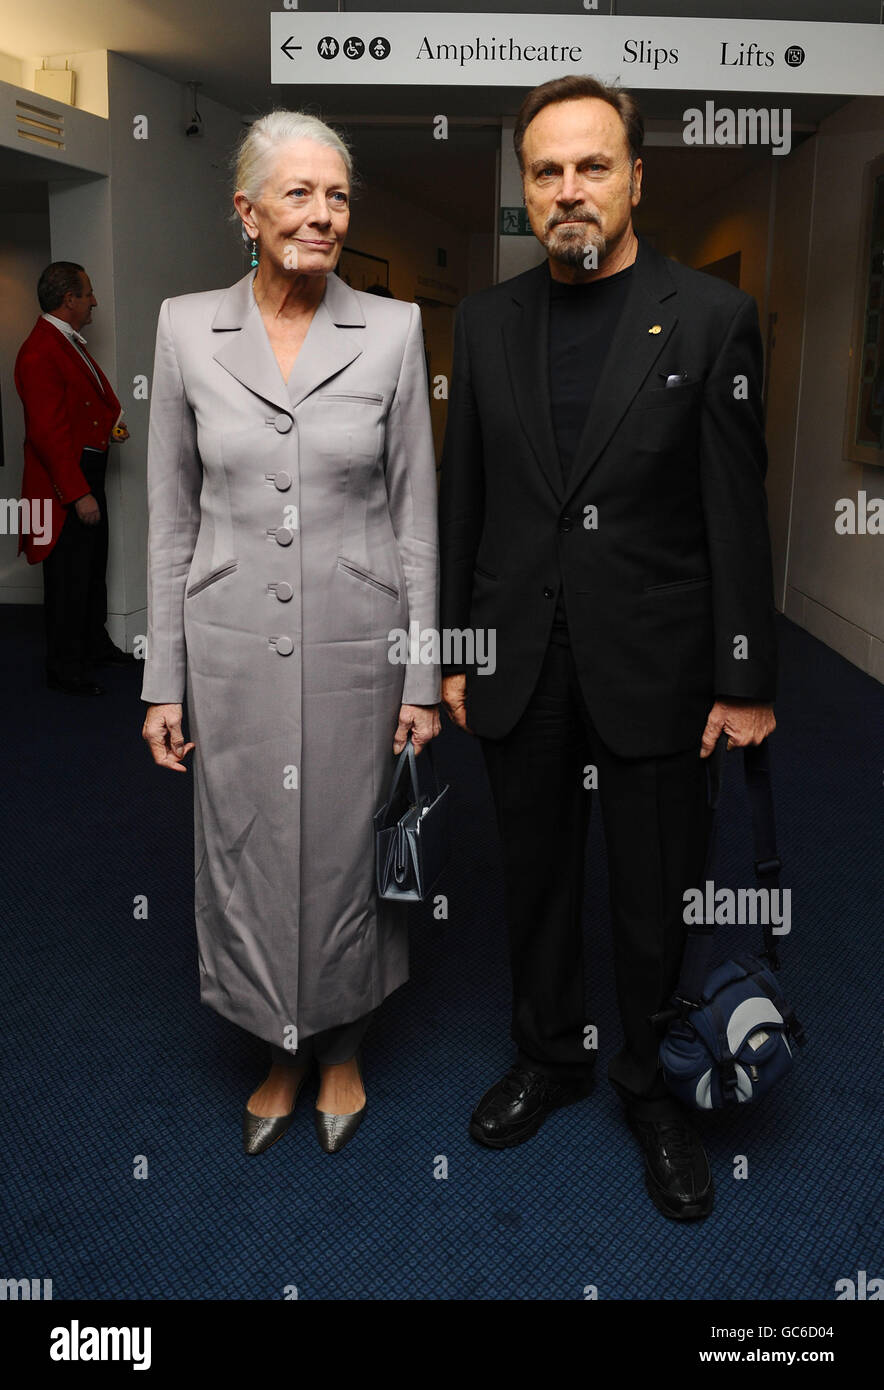 Vanessa Redgrave and Franco Nero attend a pre-lunch reception for the Evening Standard Theatre Awards at the Royal Opera House in Covent Garden, London. PRESS ASSOCIATION Photo. Picture date: Monday November 23, 2009. Photo credit should read: Ian West/PA Wire Stock Photo